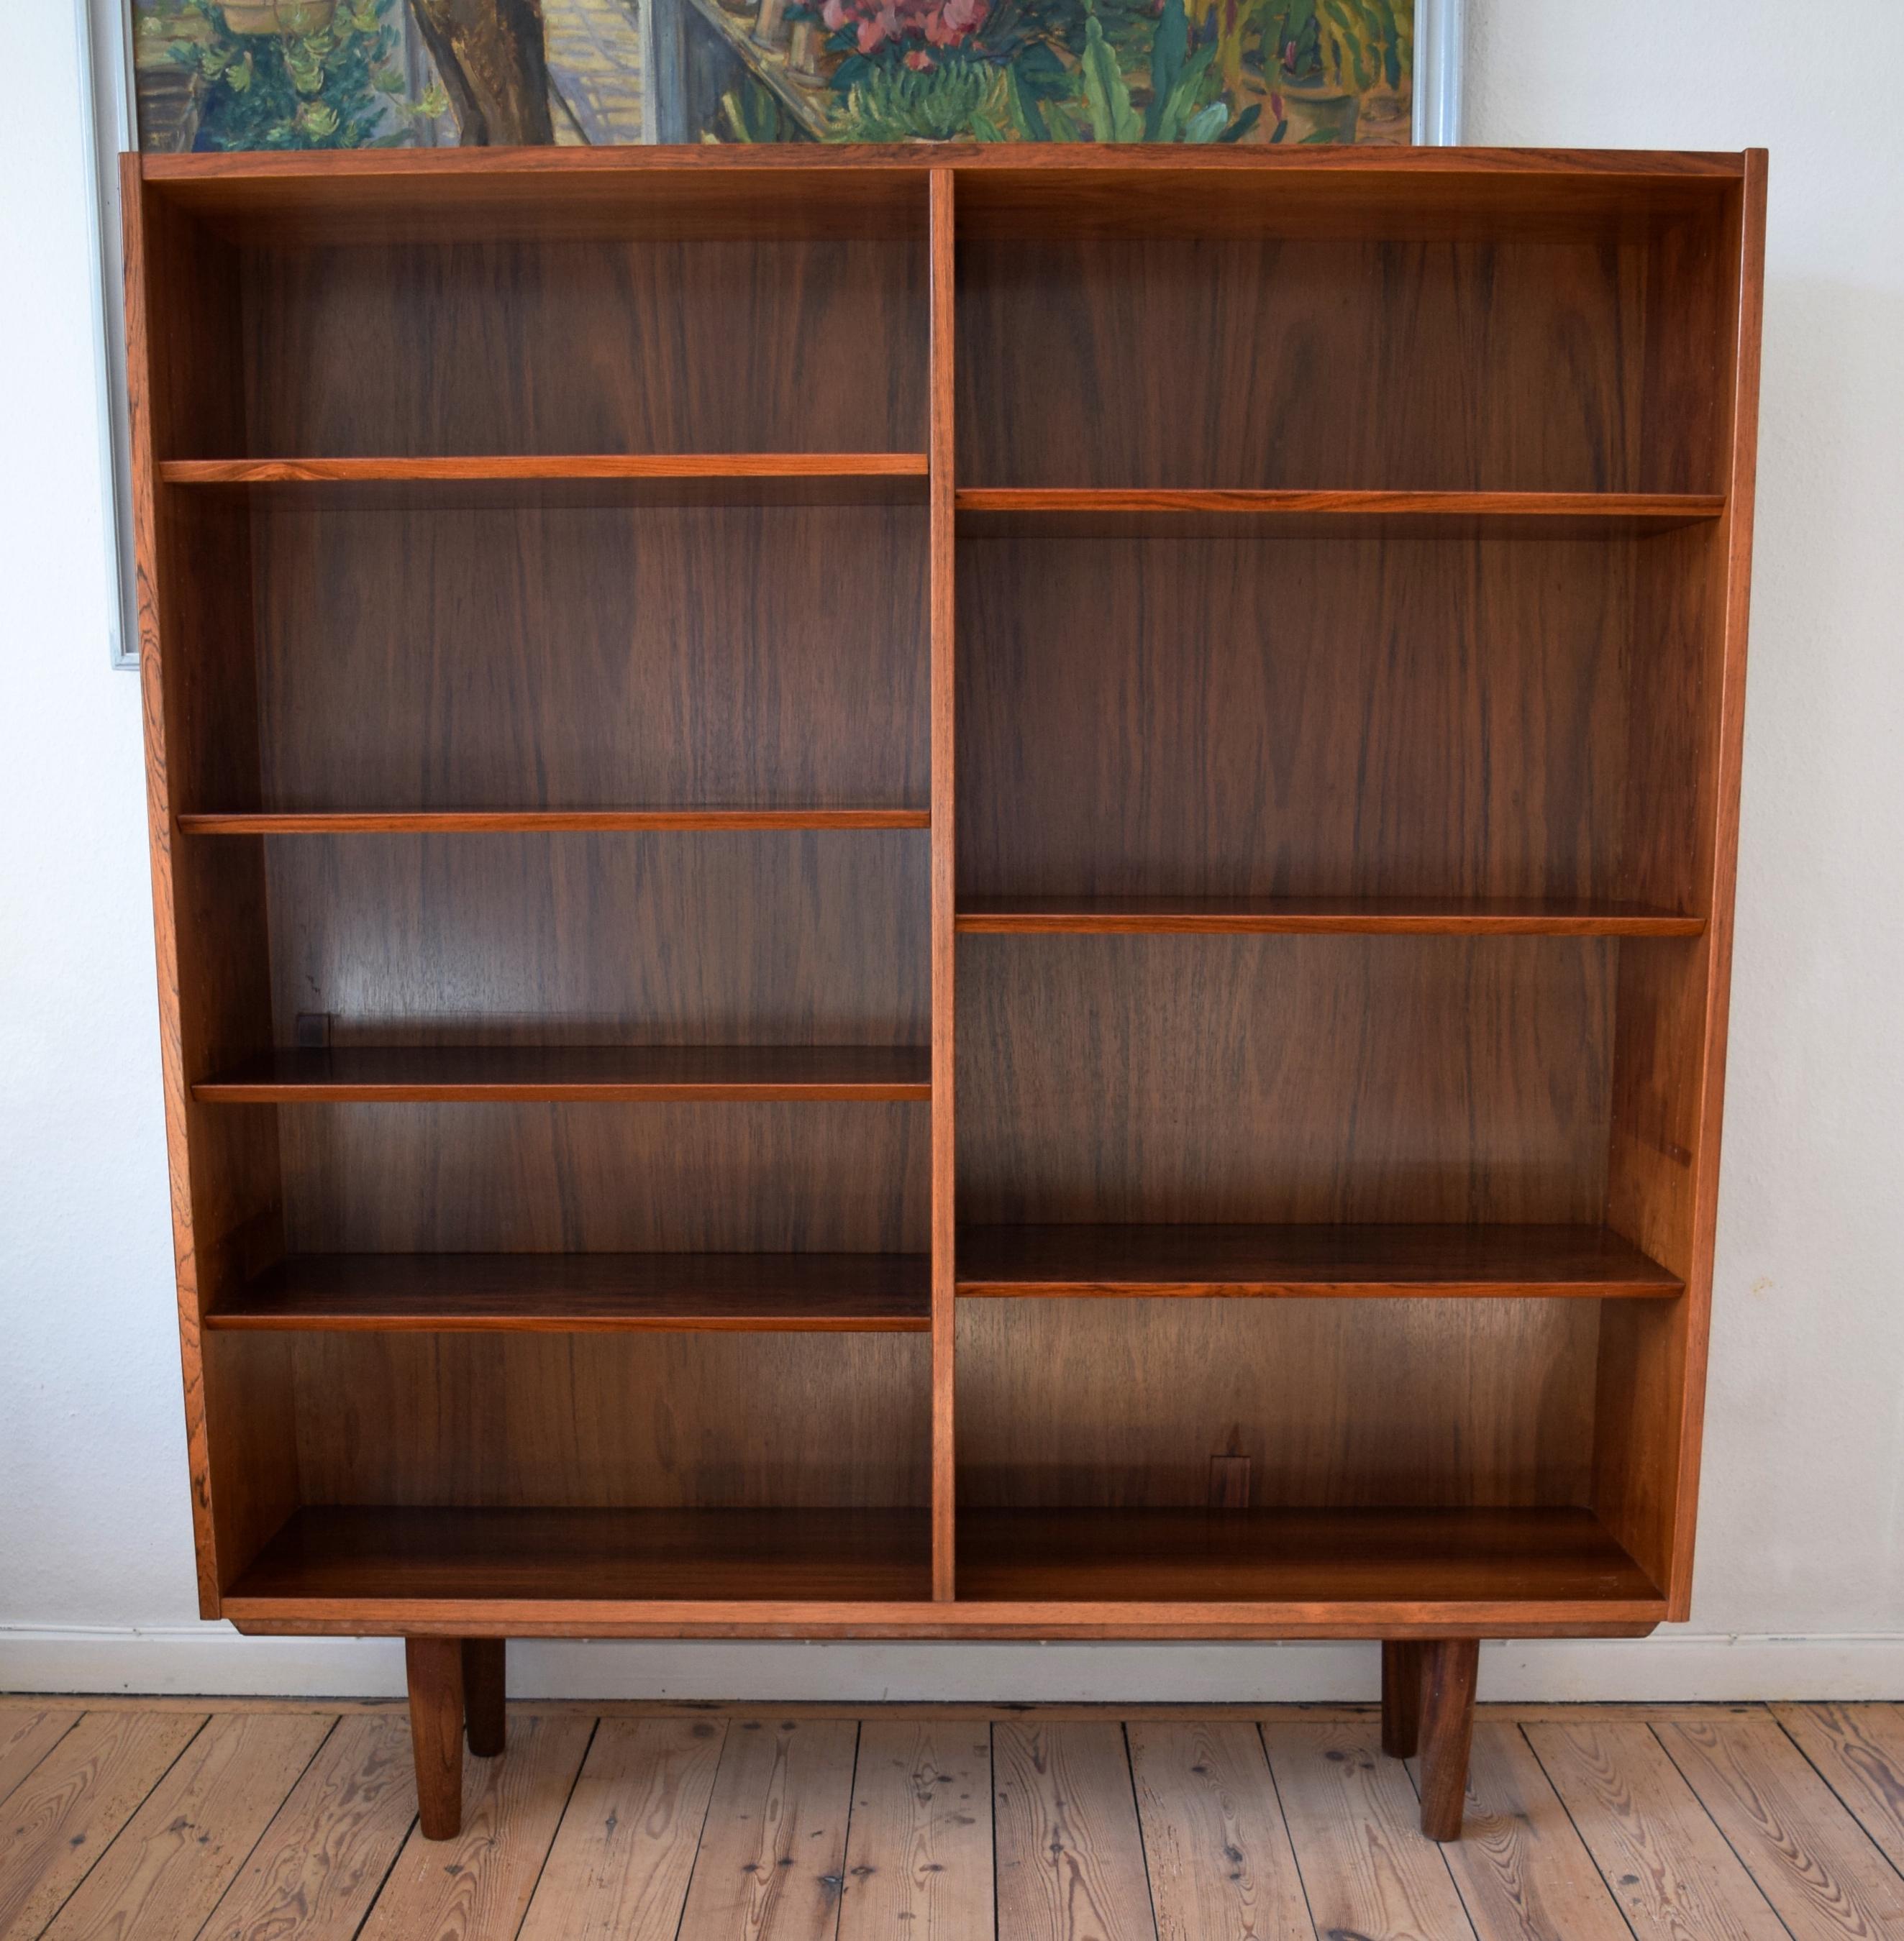 Rosewood bookshelf manufactured in Denmark by Poul Hundevad. Features adjustable shelves and sits on a frame base with teak legs. Very well made bookshelf from one of Denmark's foremost cabinet makers. Stunning rosewood grain throughout. Some